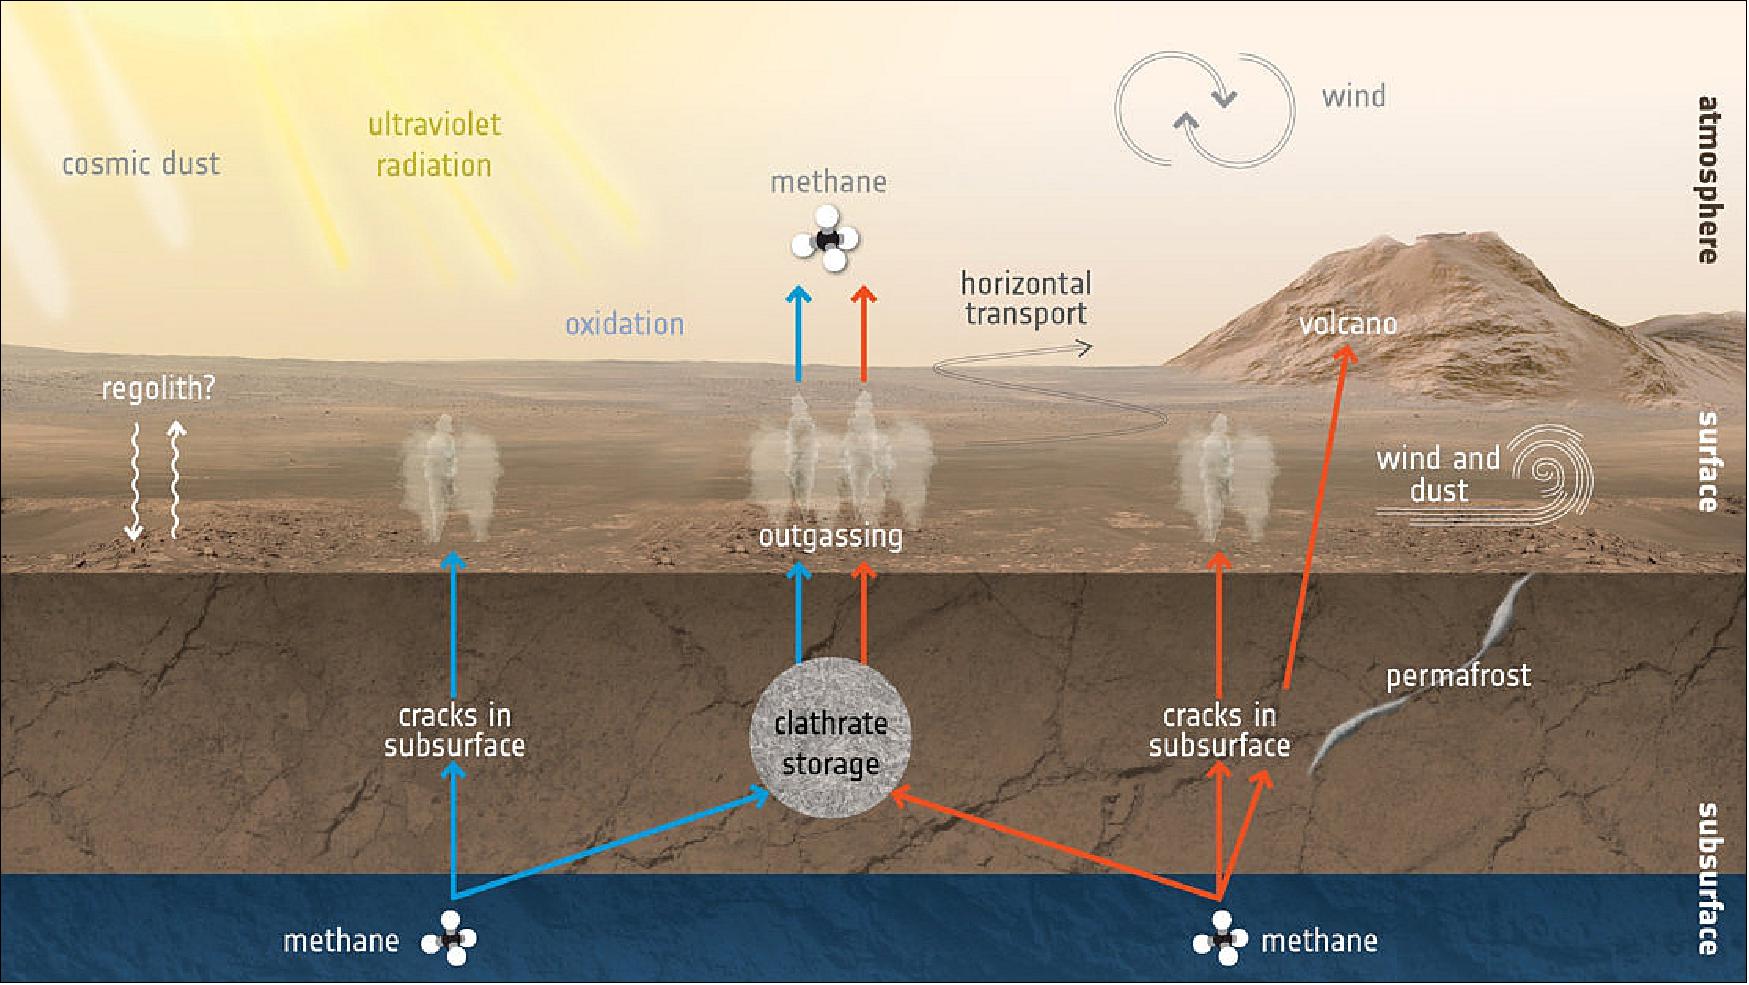 Figure 45: How methane is created and destroyed on Mars is an important question in understanding the various detections and non-detections of methane at Mars, with differences in both time and location. Although making up a very small amount of the overall atmospheric inventory, methane in particular holds key clues to the planet's current state of activity. This graphic depicts some of the possible ways methane might be added or removed from the atmosphere. One exciting possibility is that methane is generated by microbes. If buried underground, this gas could be stored in lattice-structured ice formations known as clathrates, and released to the atmosphere at a much later time (image credit: ESA)